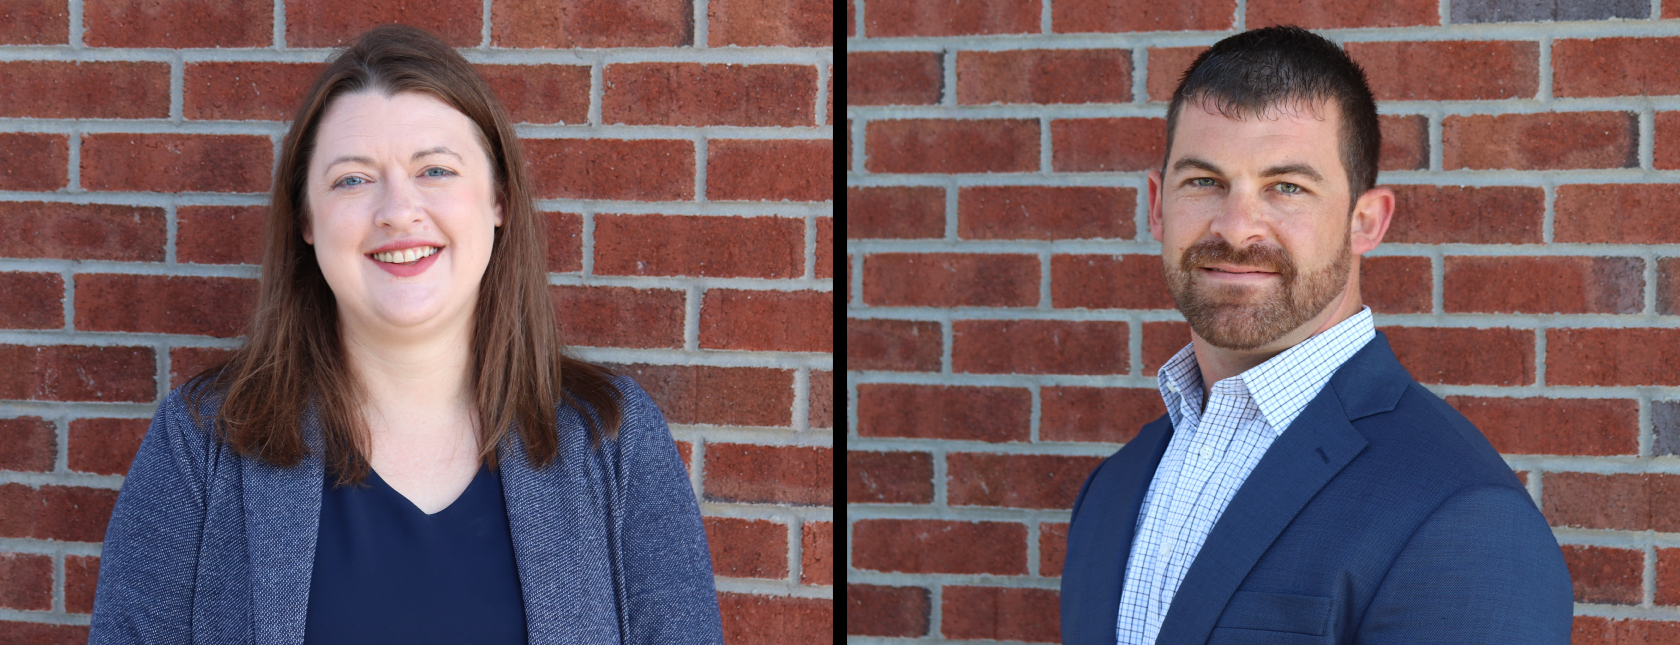 Jennifer Franklin and Jacob Wyatt Promoted to Assistant Vice President